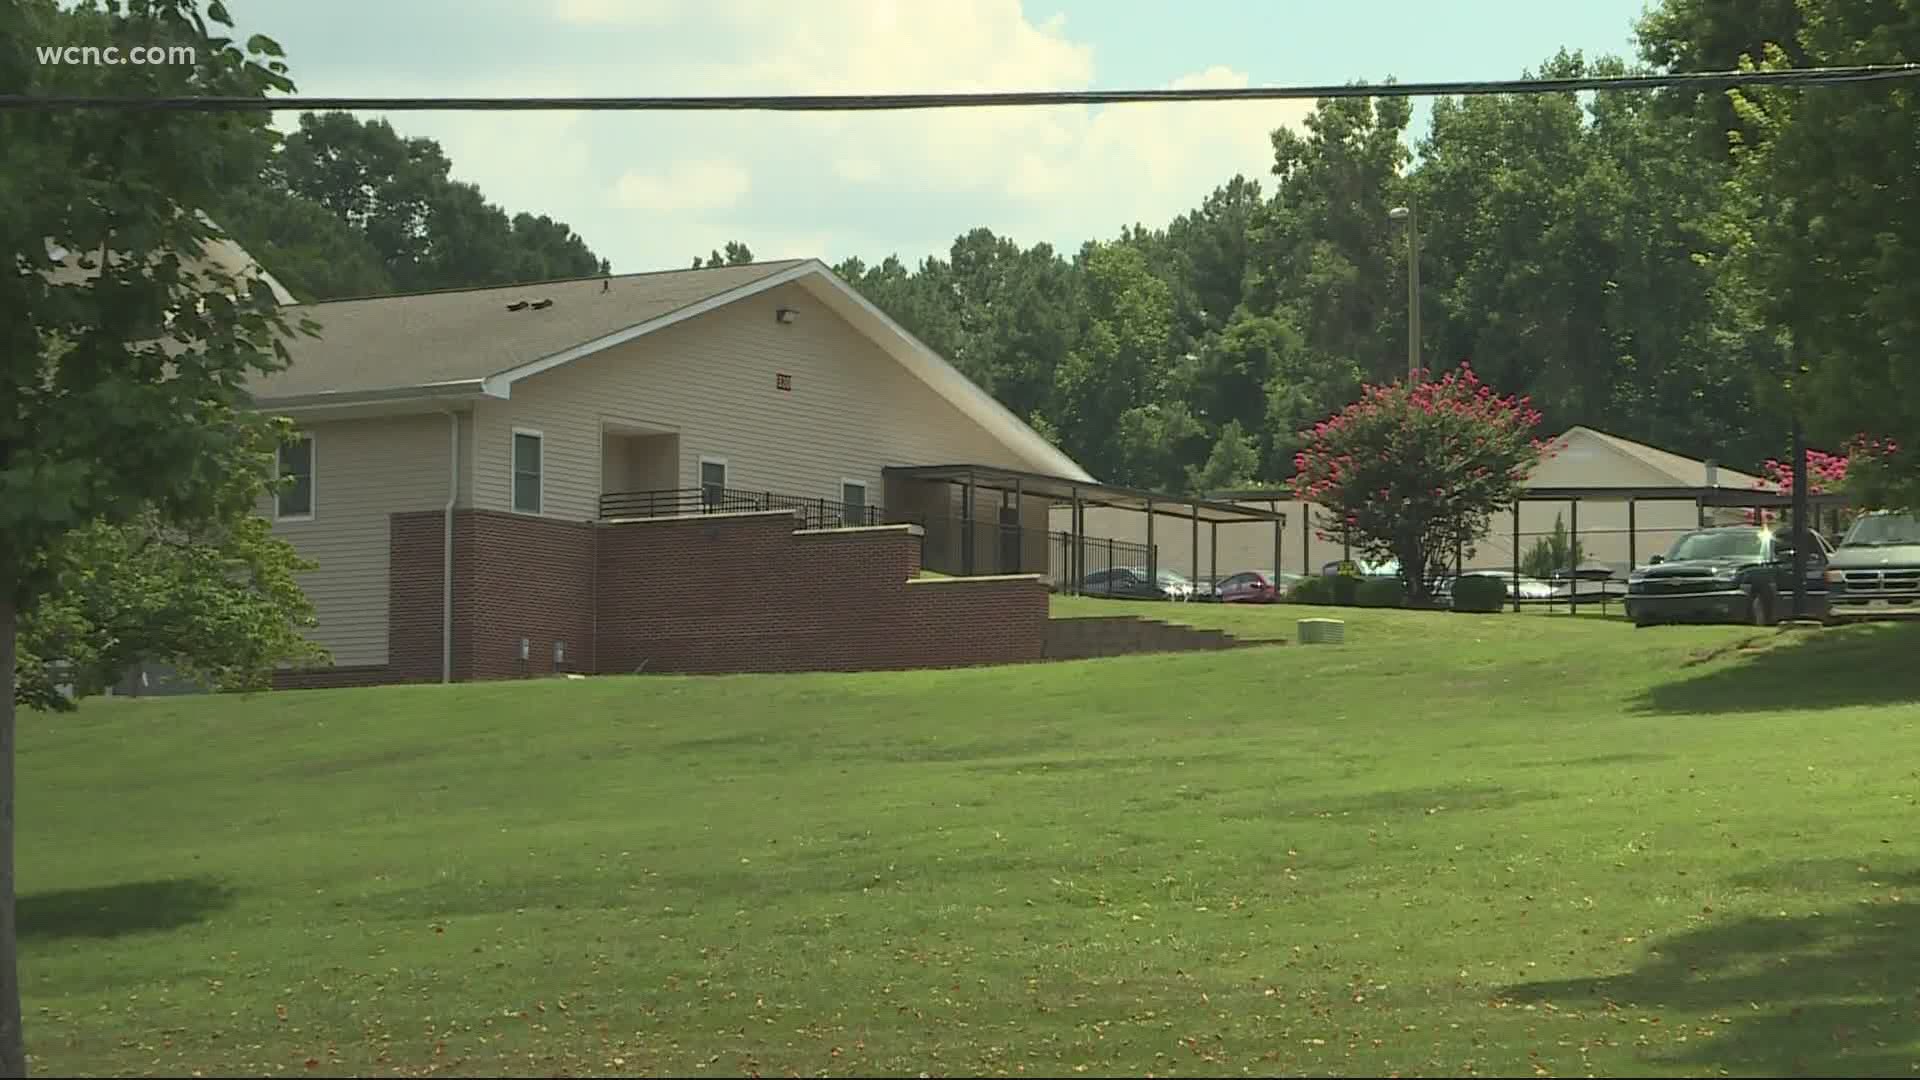 Nursing homes in Gaston Co. experiencing an Outbreak of COVID-19